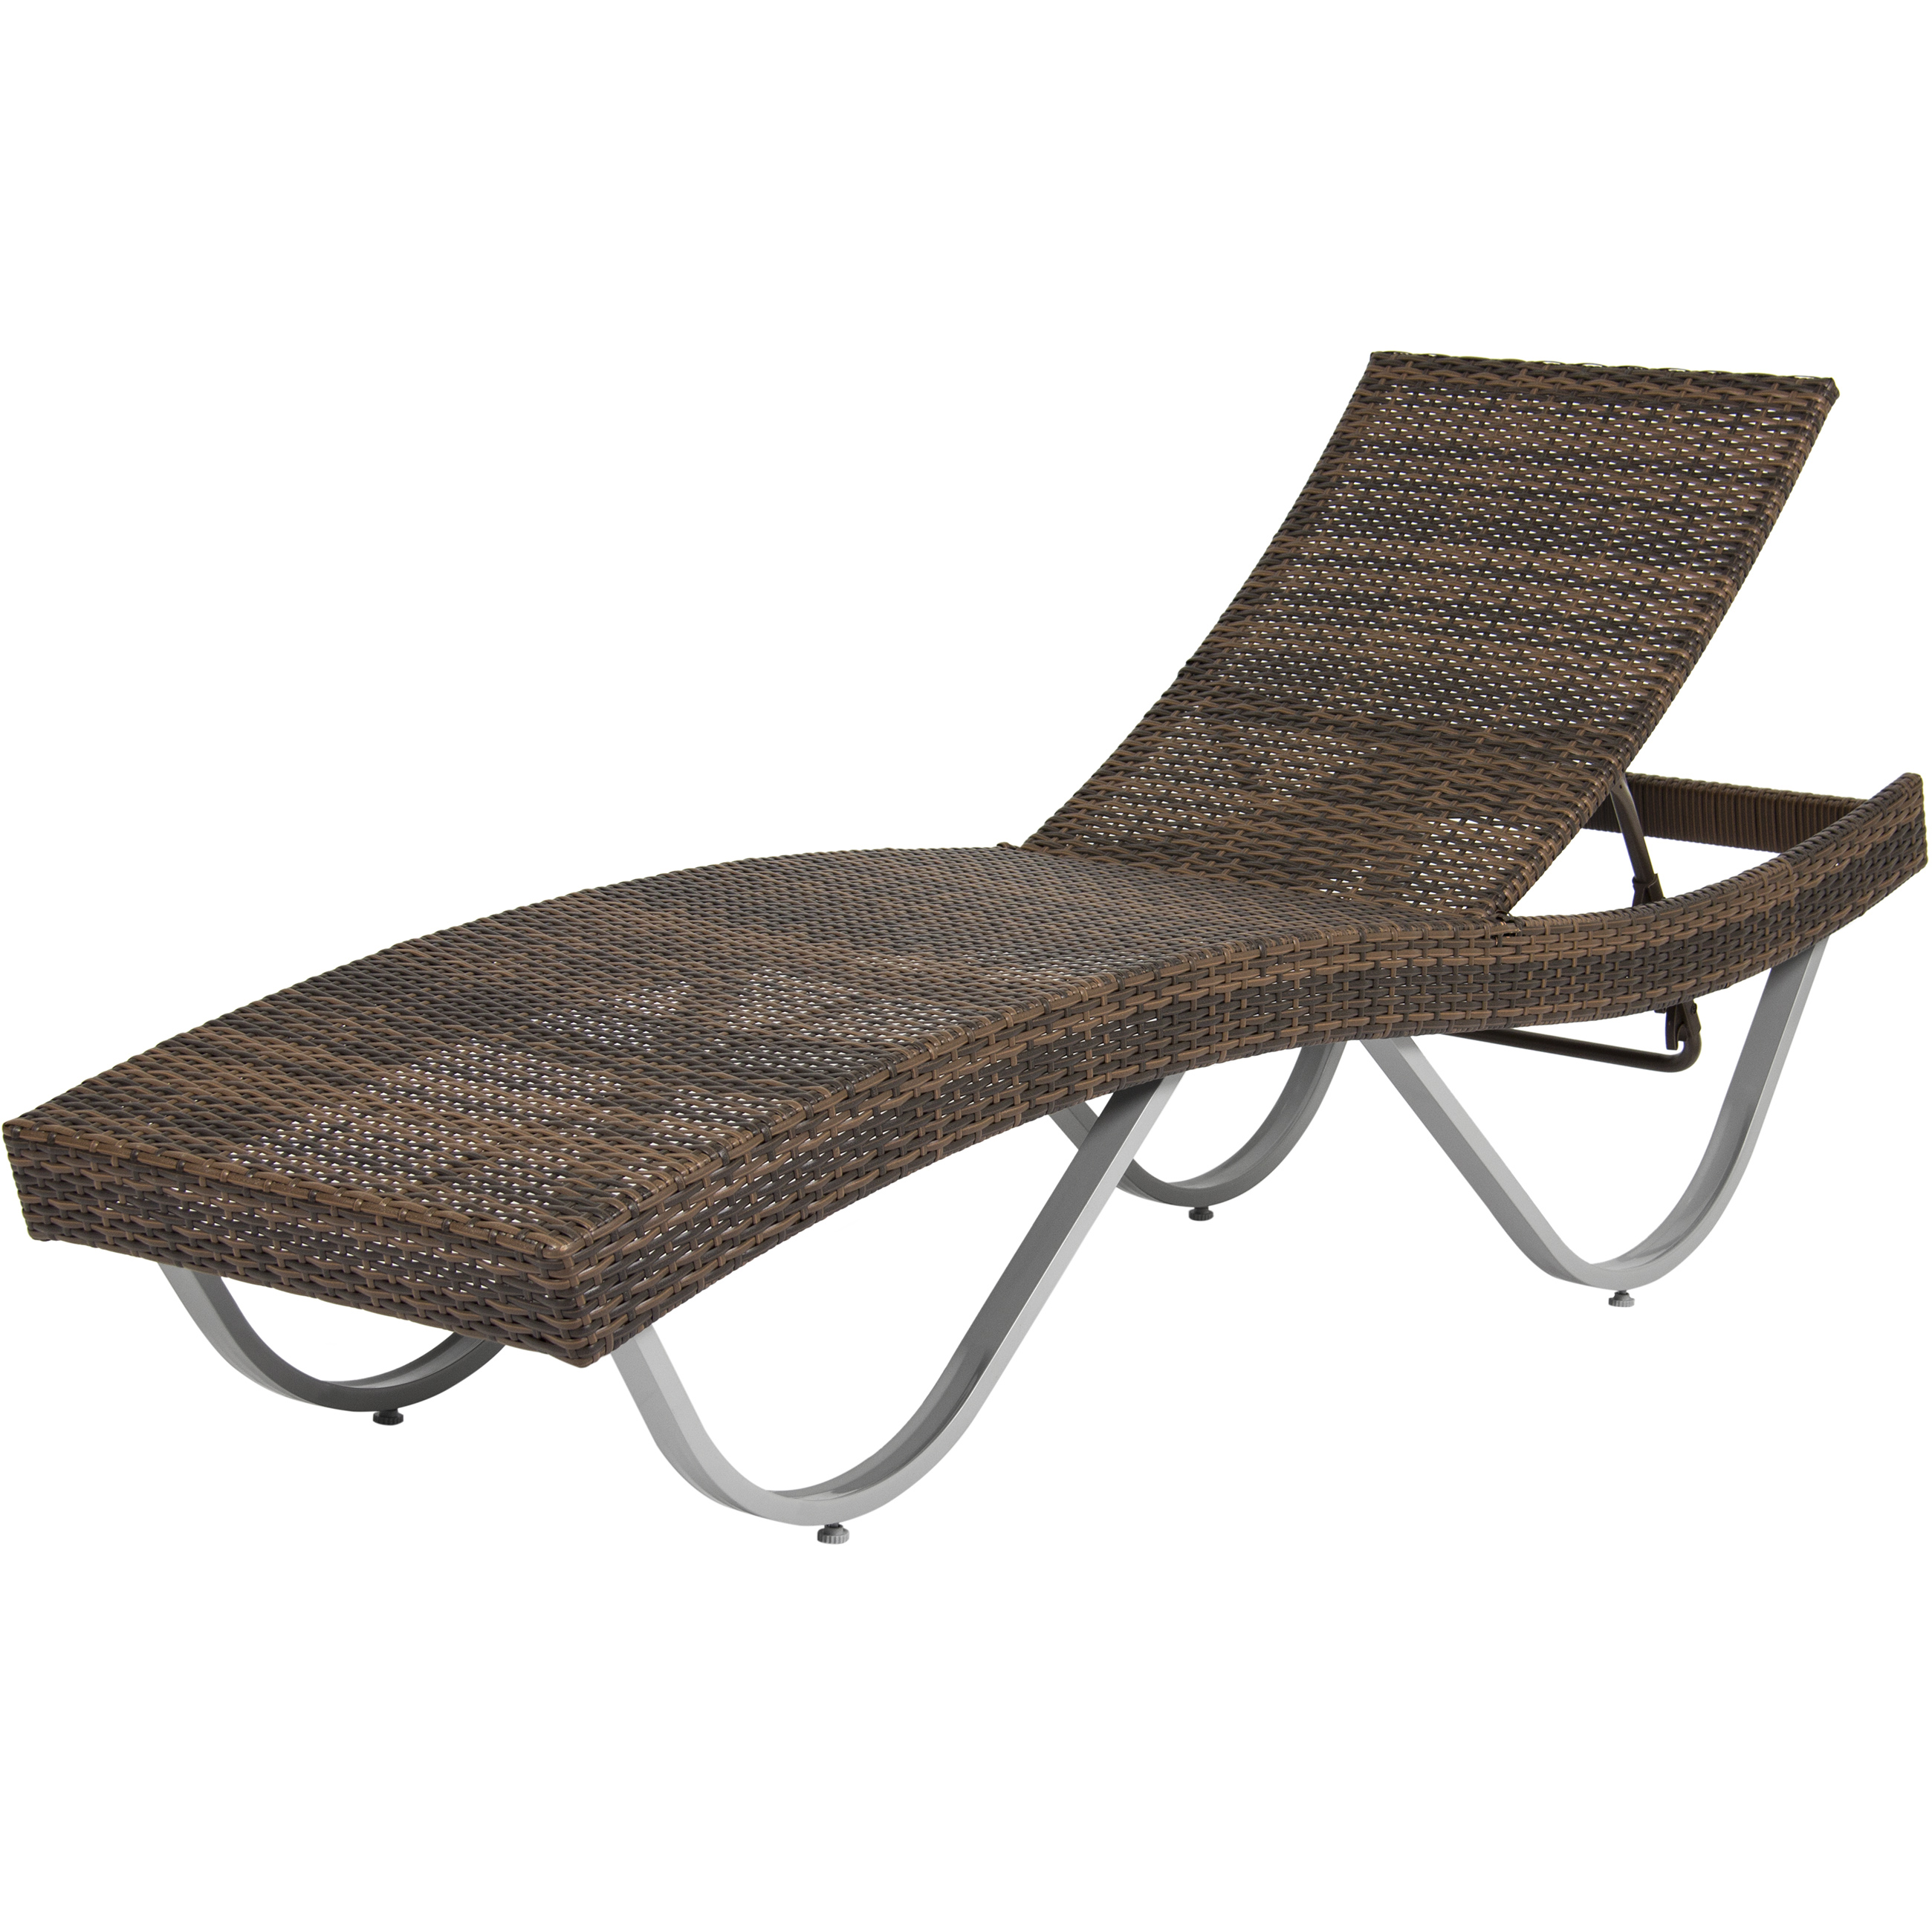 Rattan Outdoor Lounge Chair photo - 4